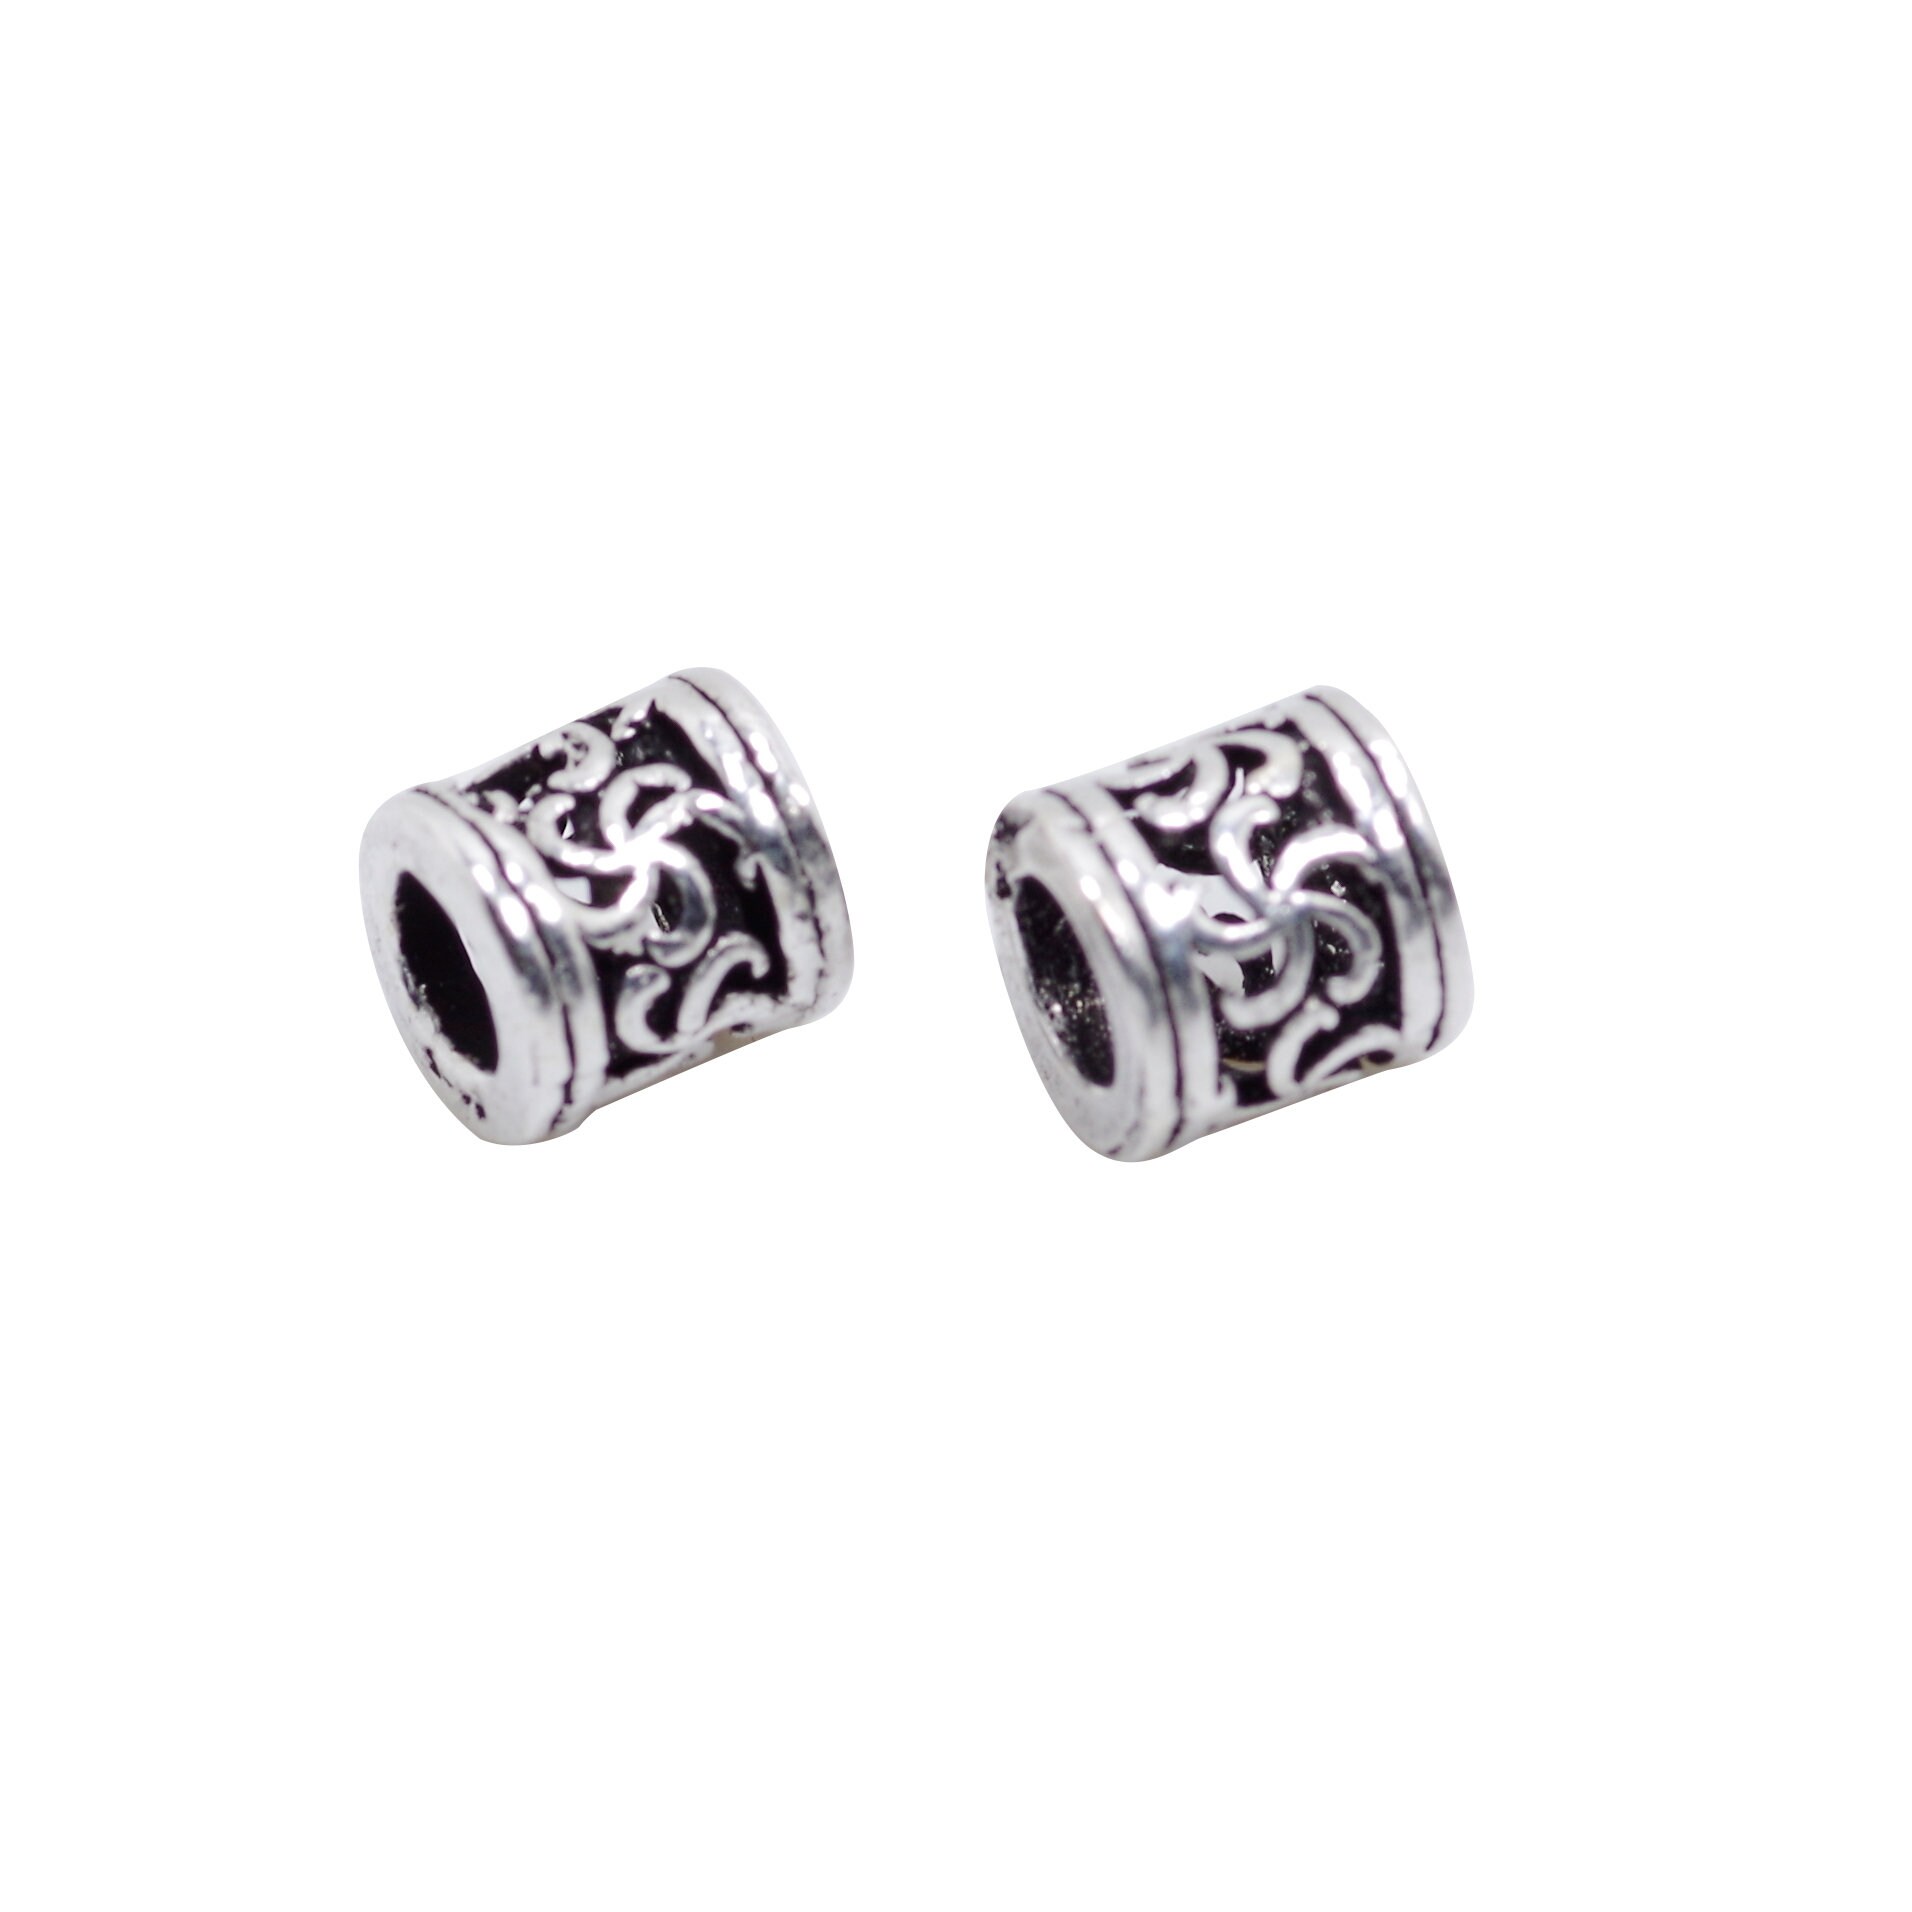 Sterling Silver Tube Spacer Beads 1x10mm for Jewelry Making & Beading Projects